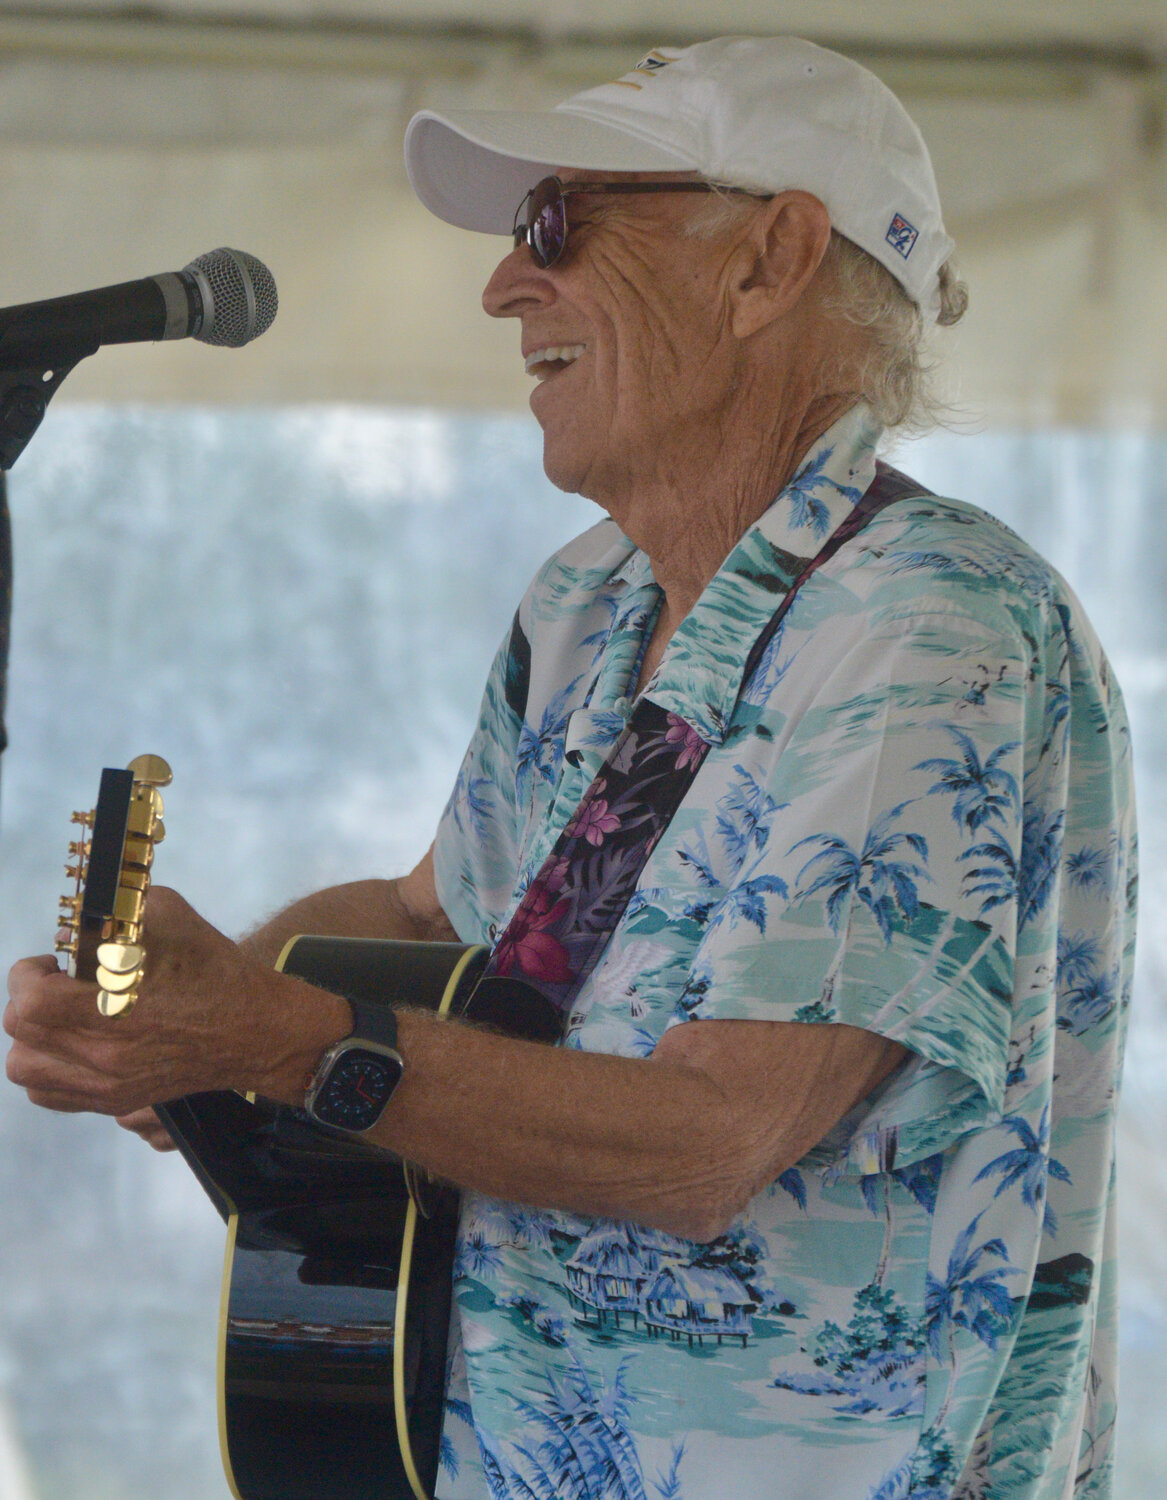 Jimmy Buffett had the crowd eating out of his hand during his generous set.